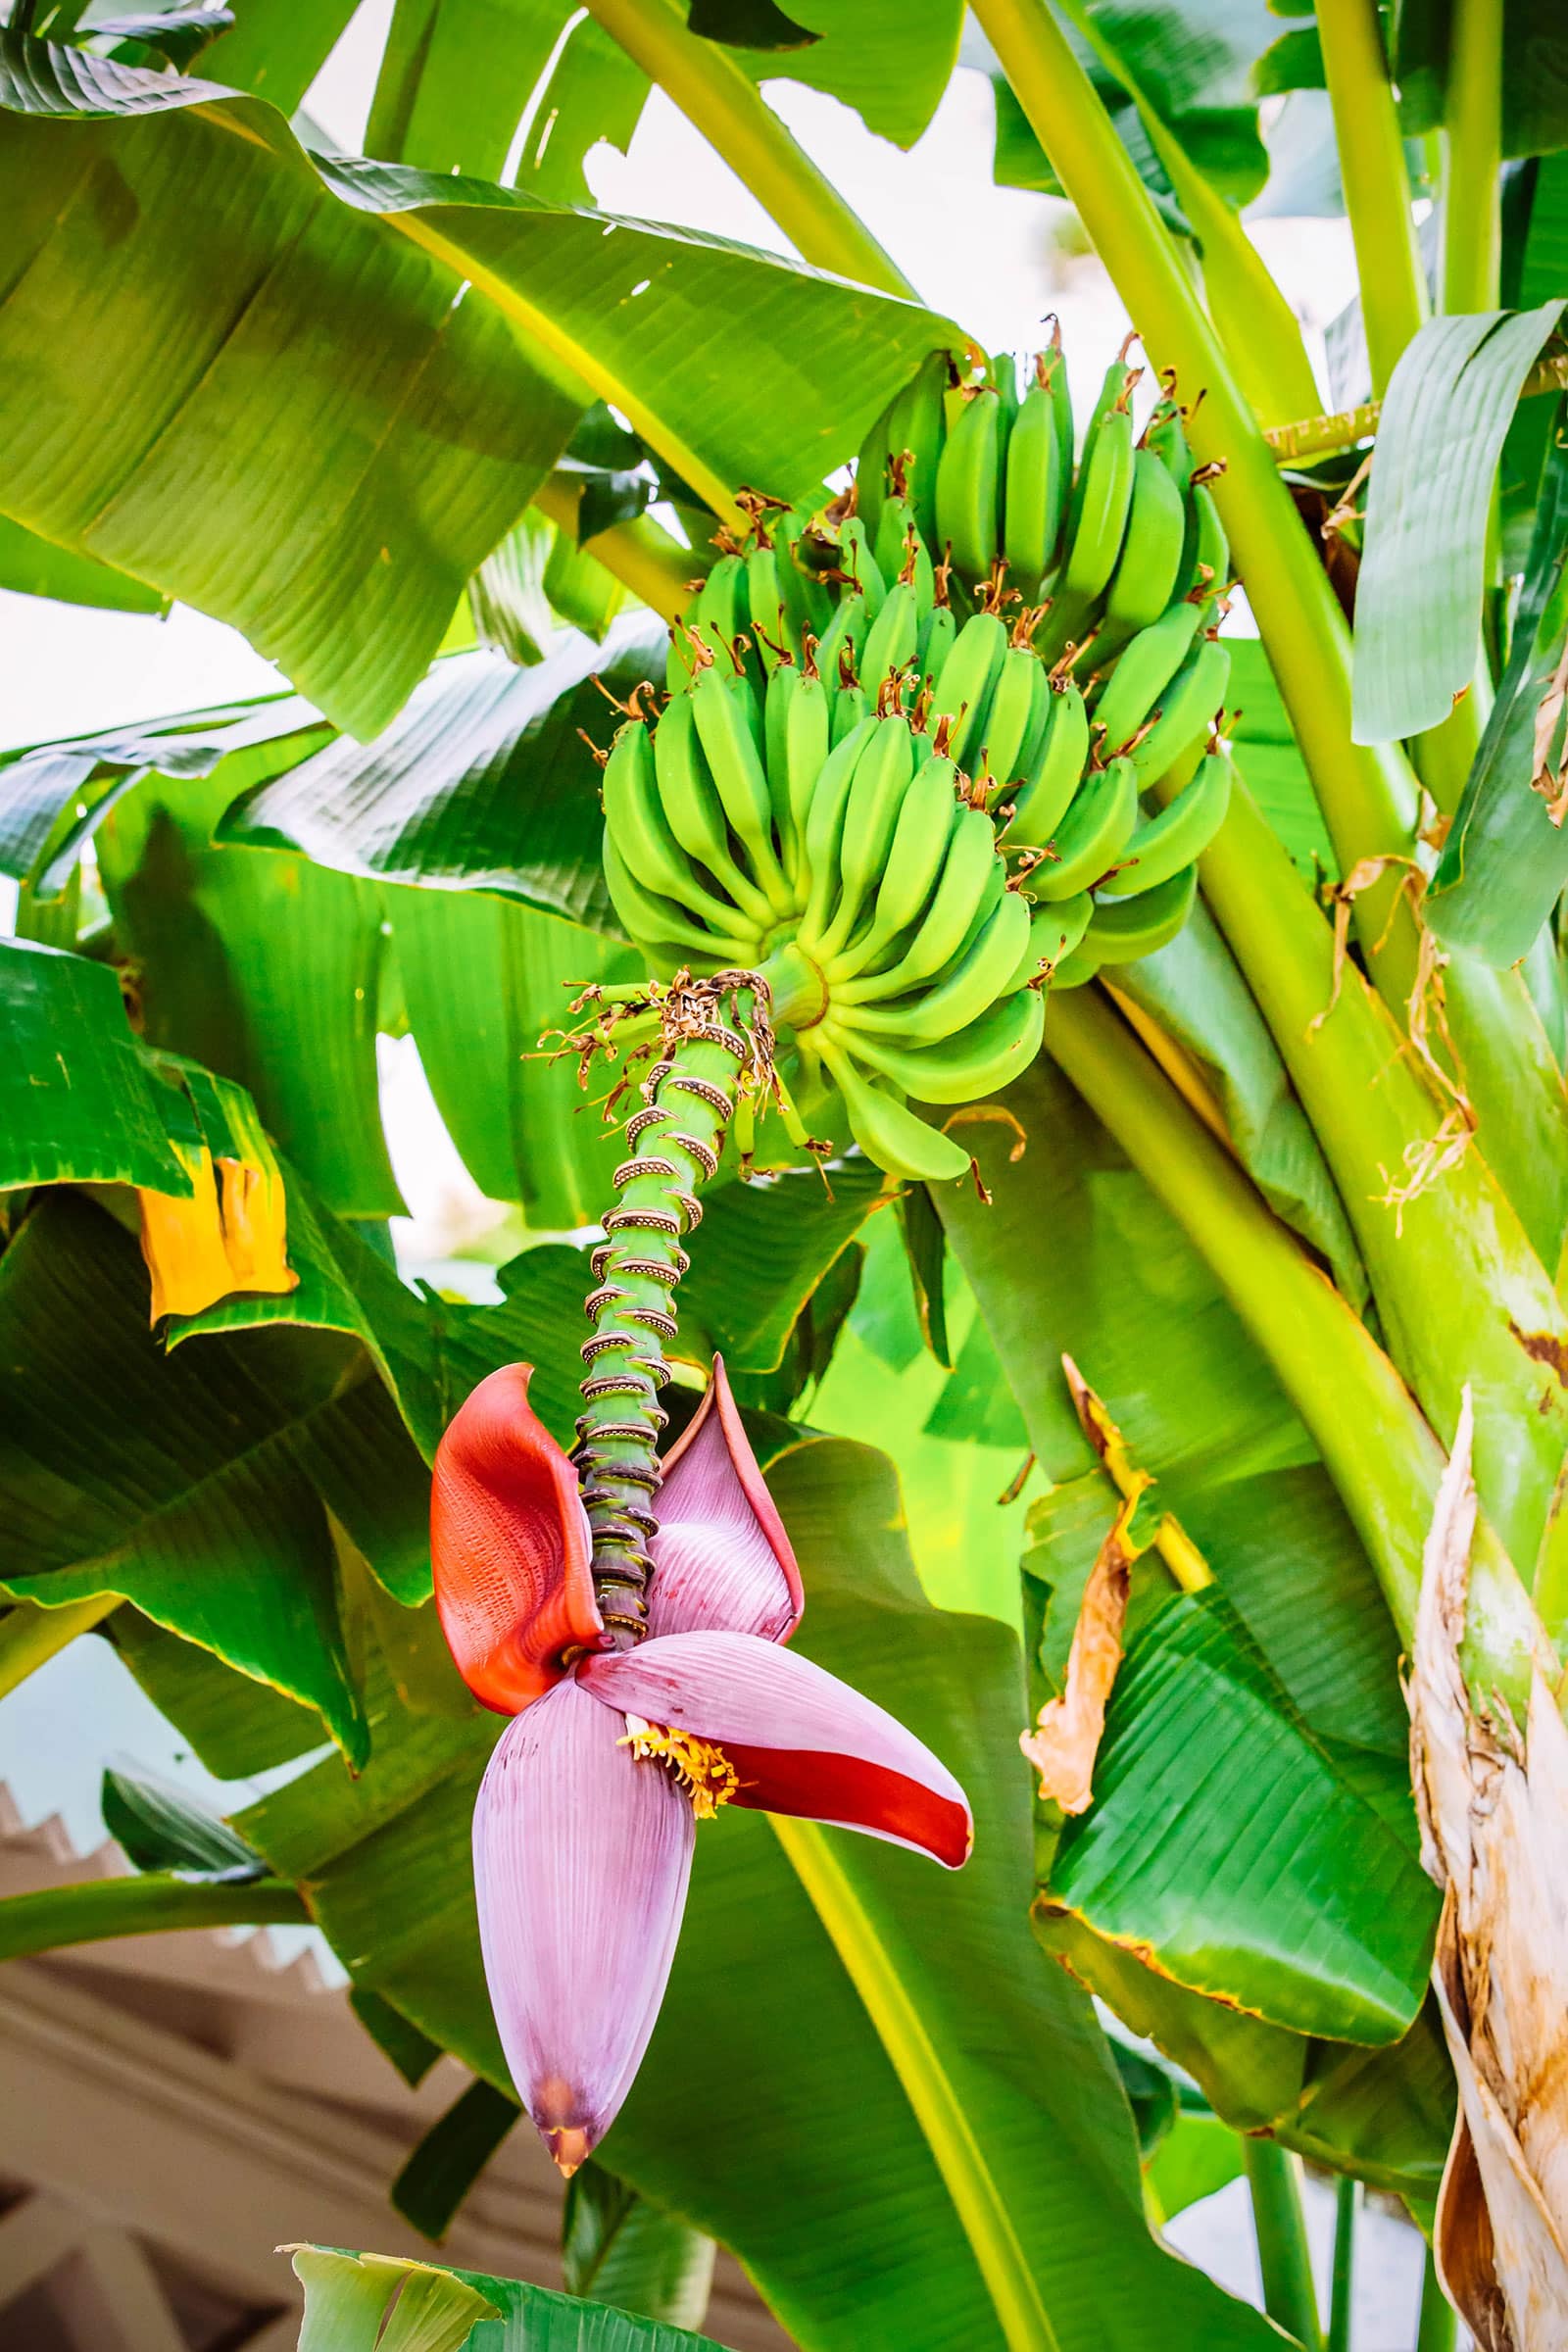 A bunch of unripe bananas growing on a banana plant with a banana flower on the end